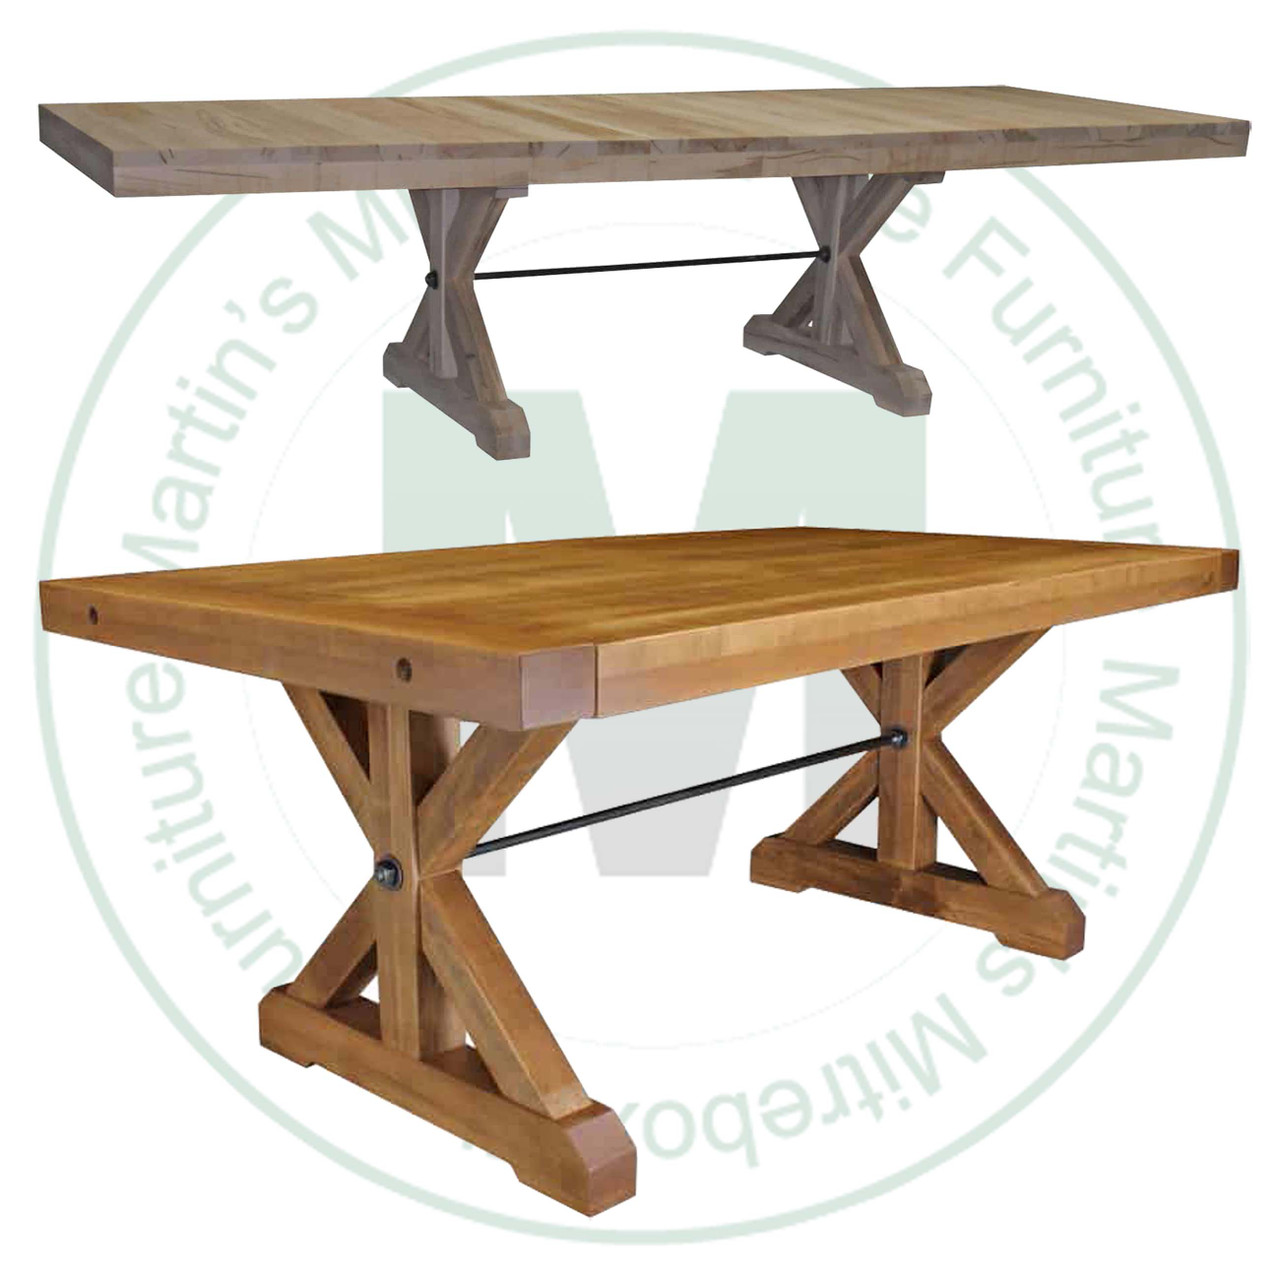 Pine Klondike Trestle Solid Top Table 48'' Deep x 72'' Wide x 30'' High With 2 - 12'' Leaves